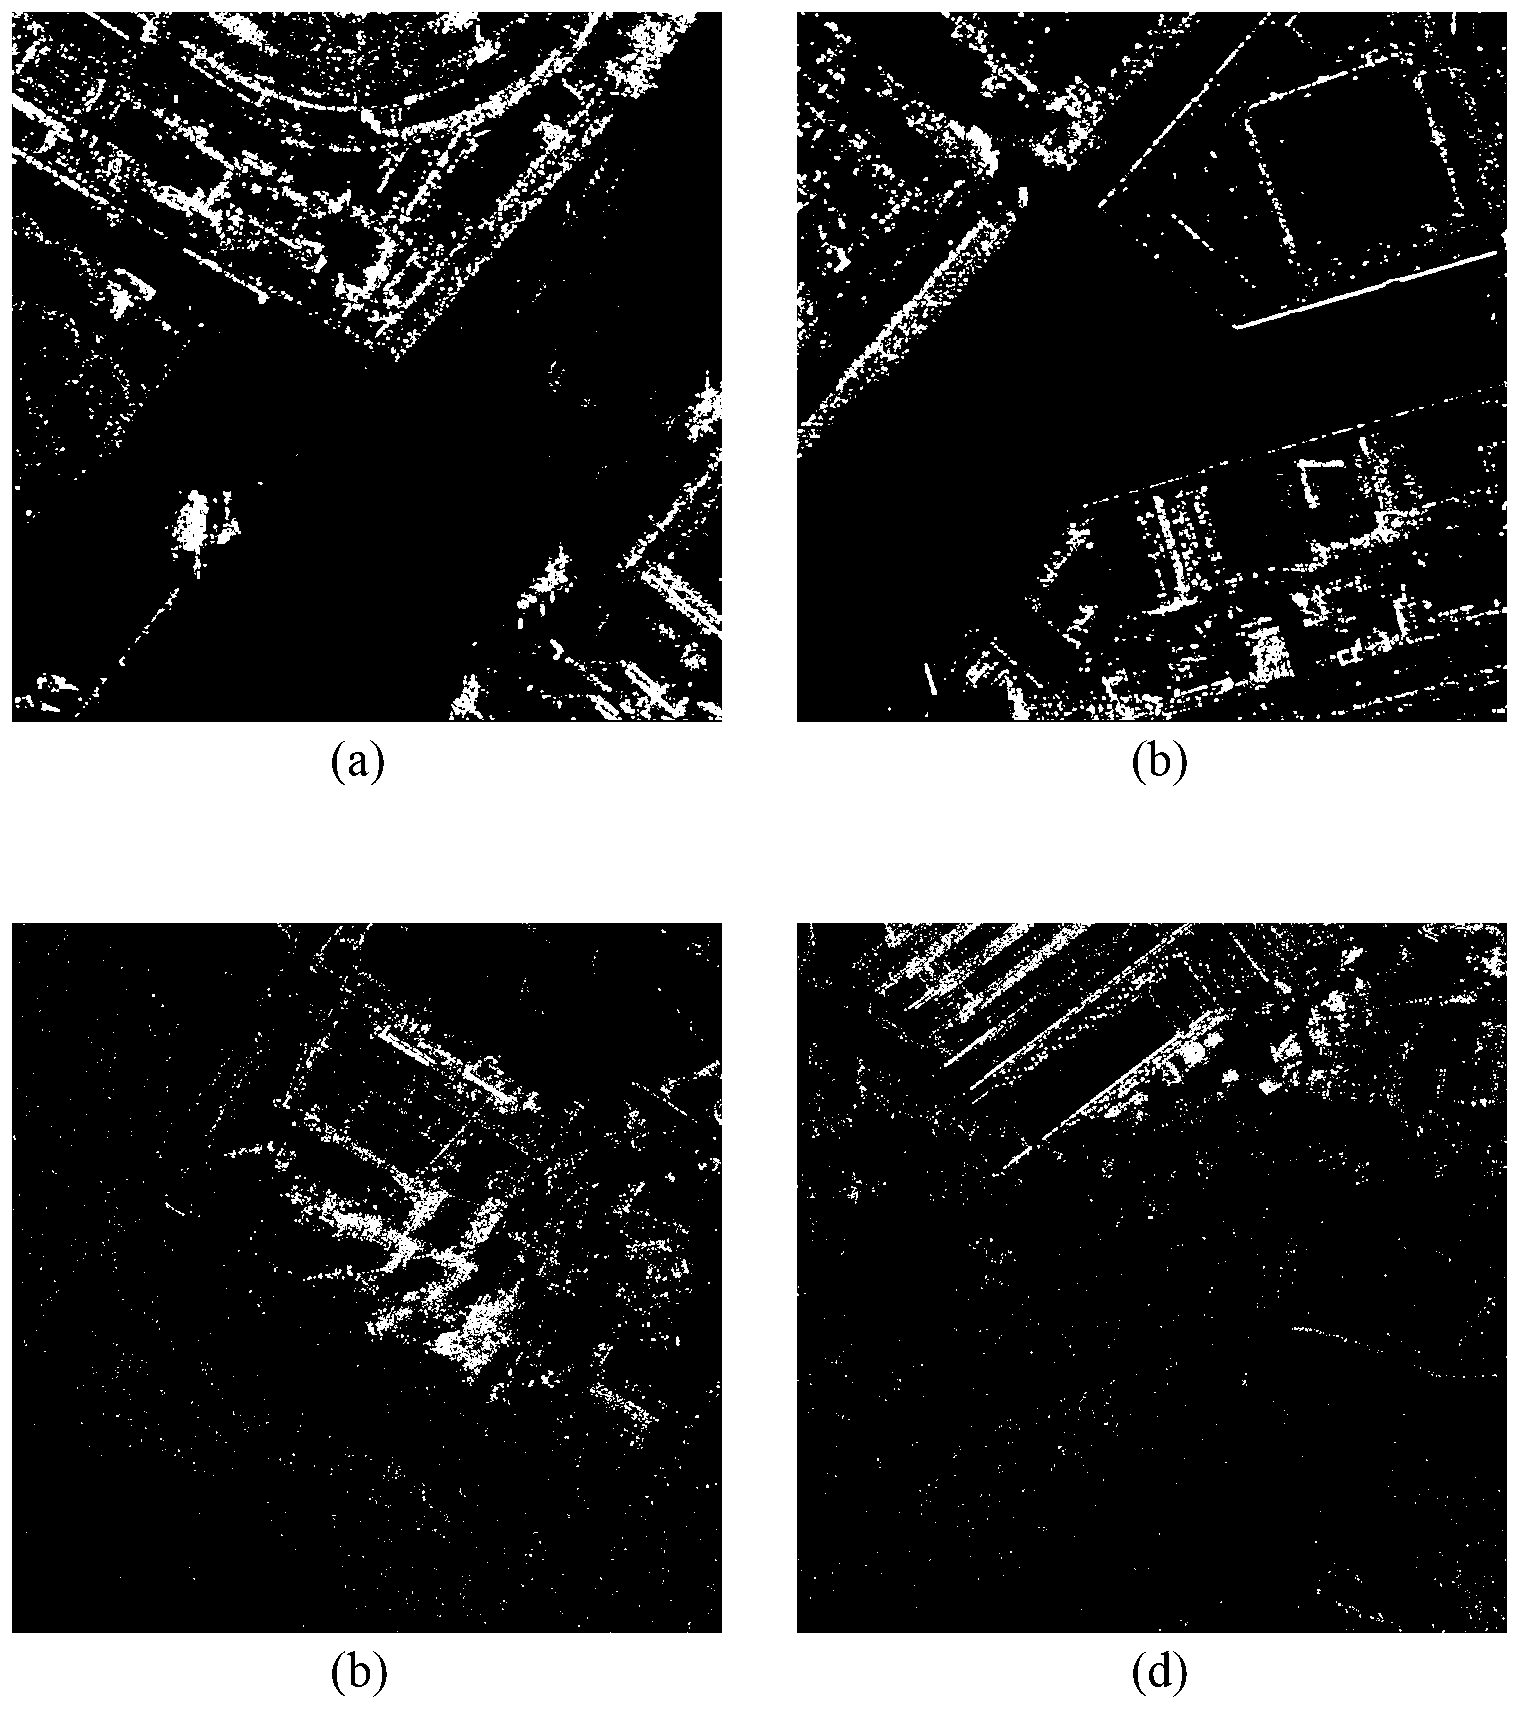 Synthetic aperture radar (SAR) image compression method based on target area extraction and direction wave